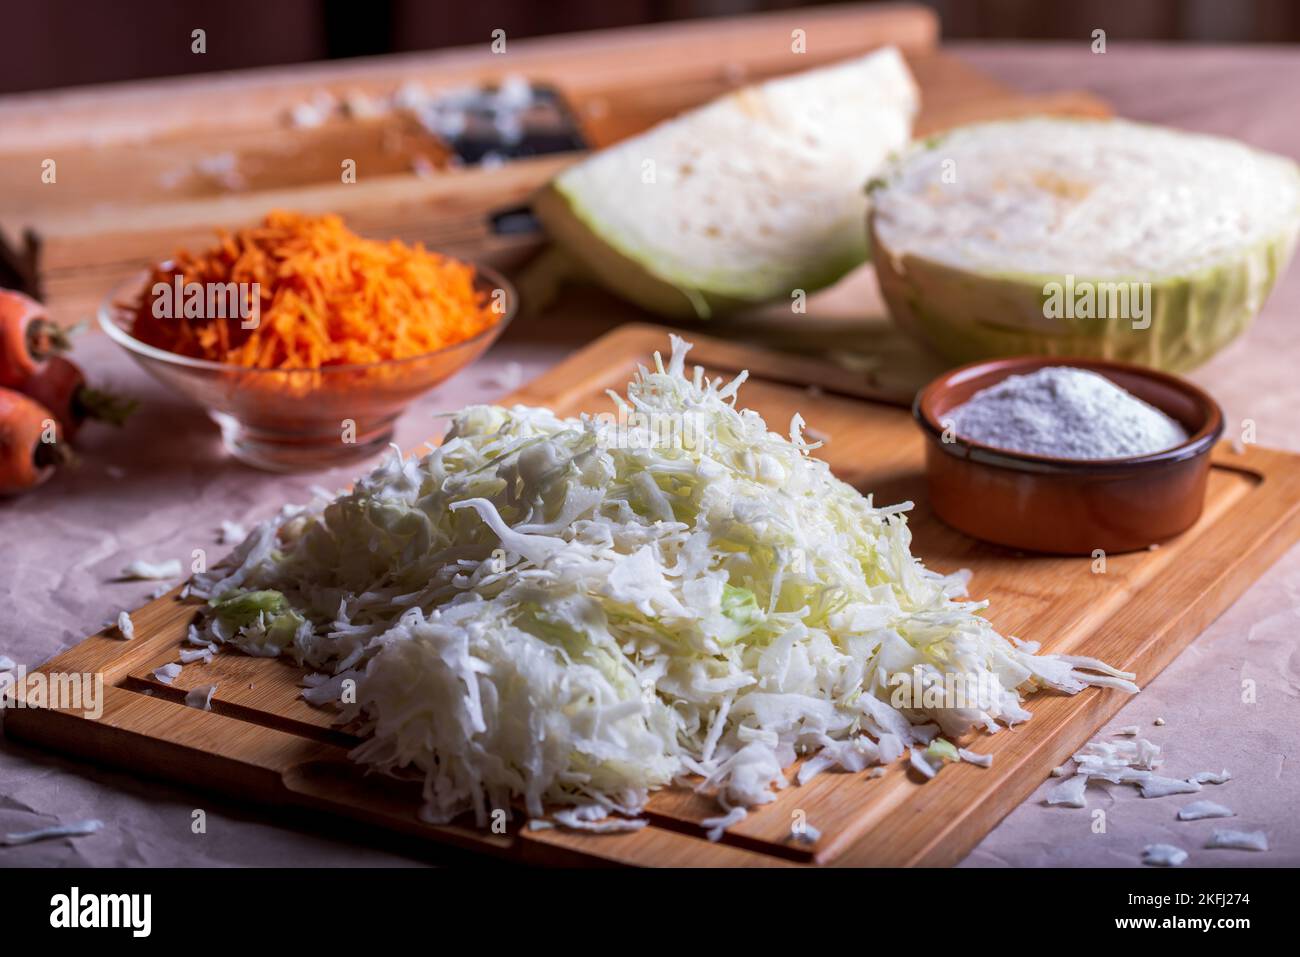 Prepare cabbage for fermentation. Cutting of cabbage on cutter. Homemade sauerkraut. Stock Photo